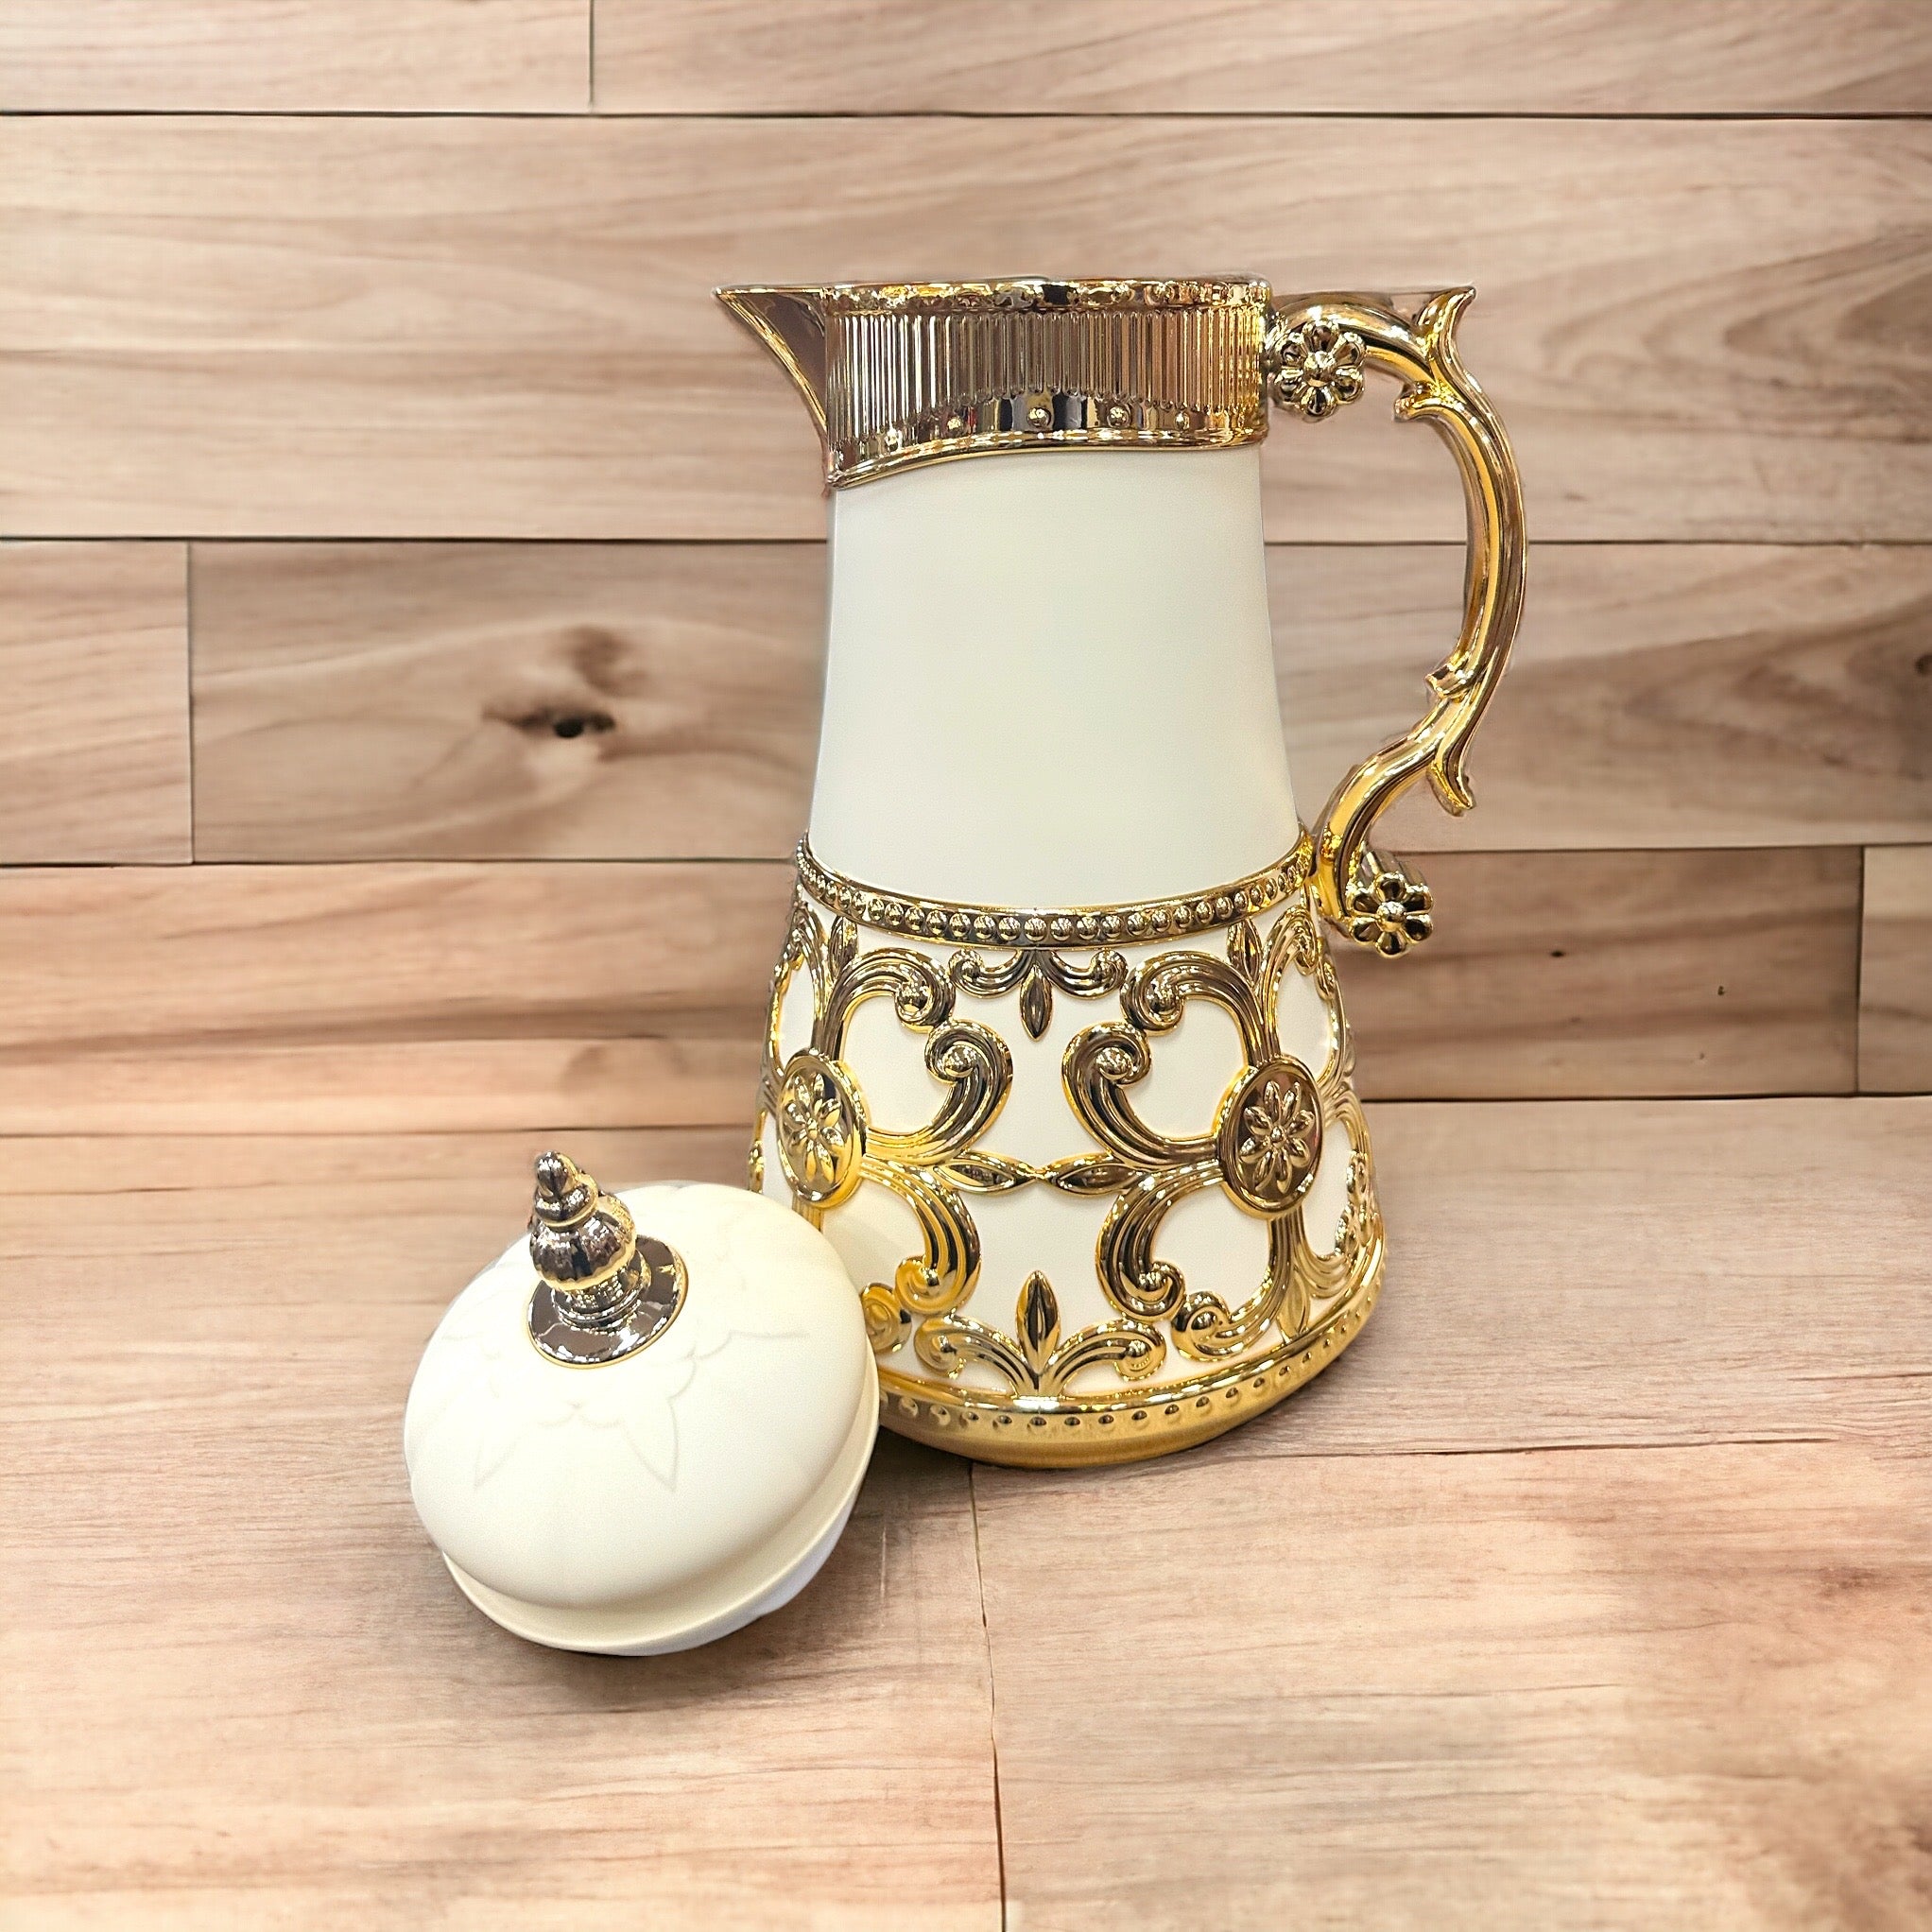 Arabian Style Cream and Gold Thermos Pitcher Flask Pot for Coffee or Tea